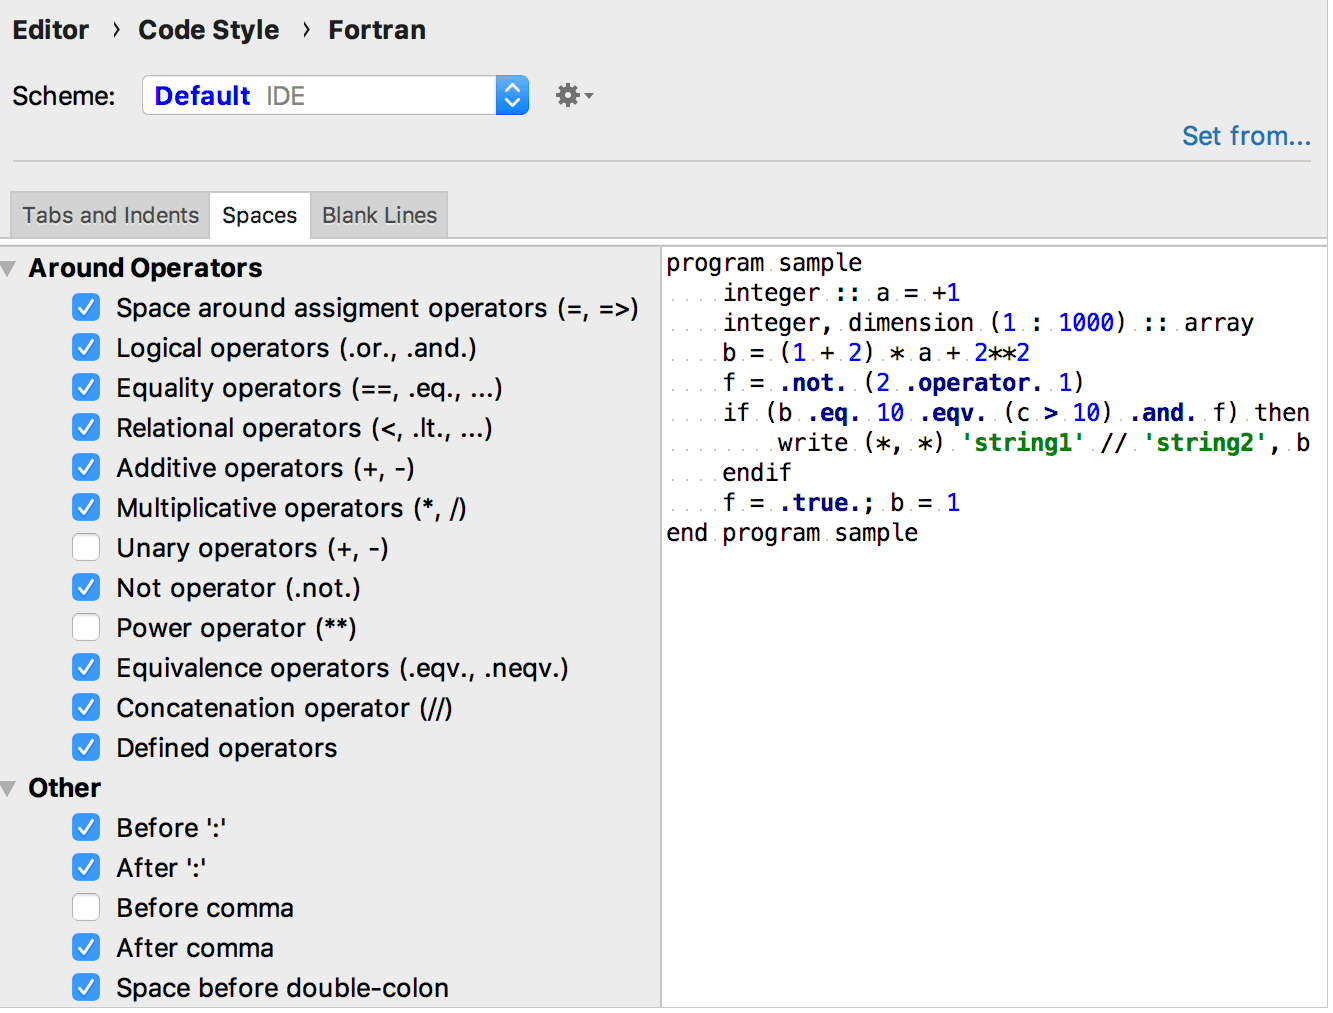 Code styles for Fortran